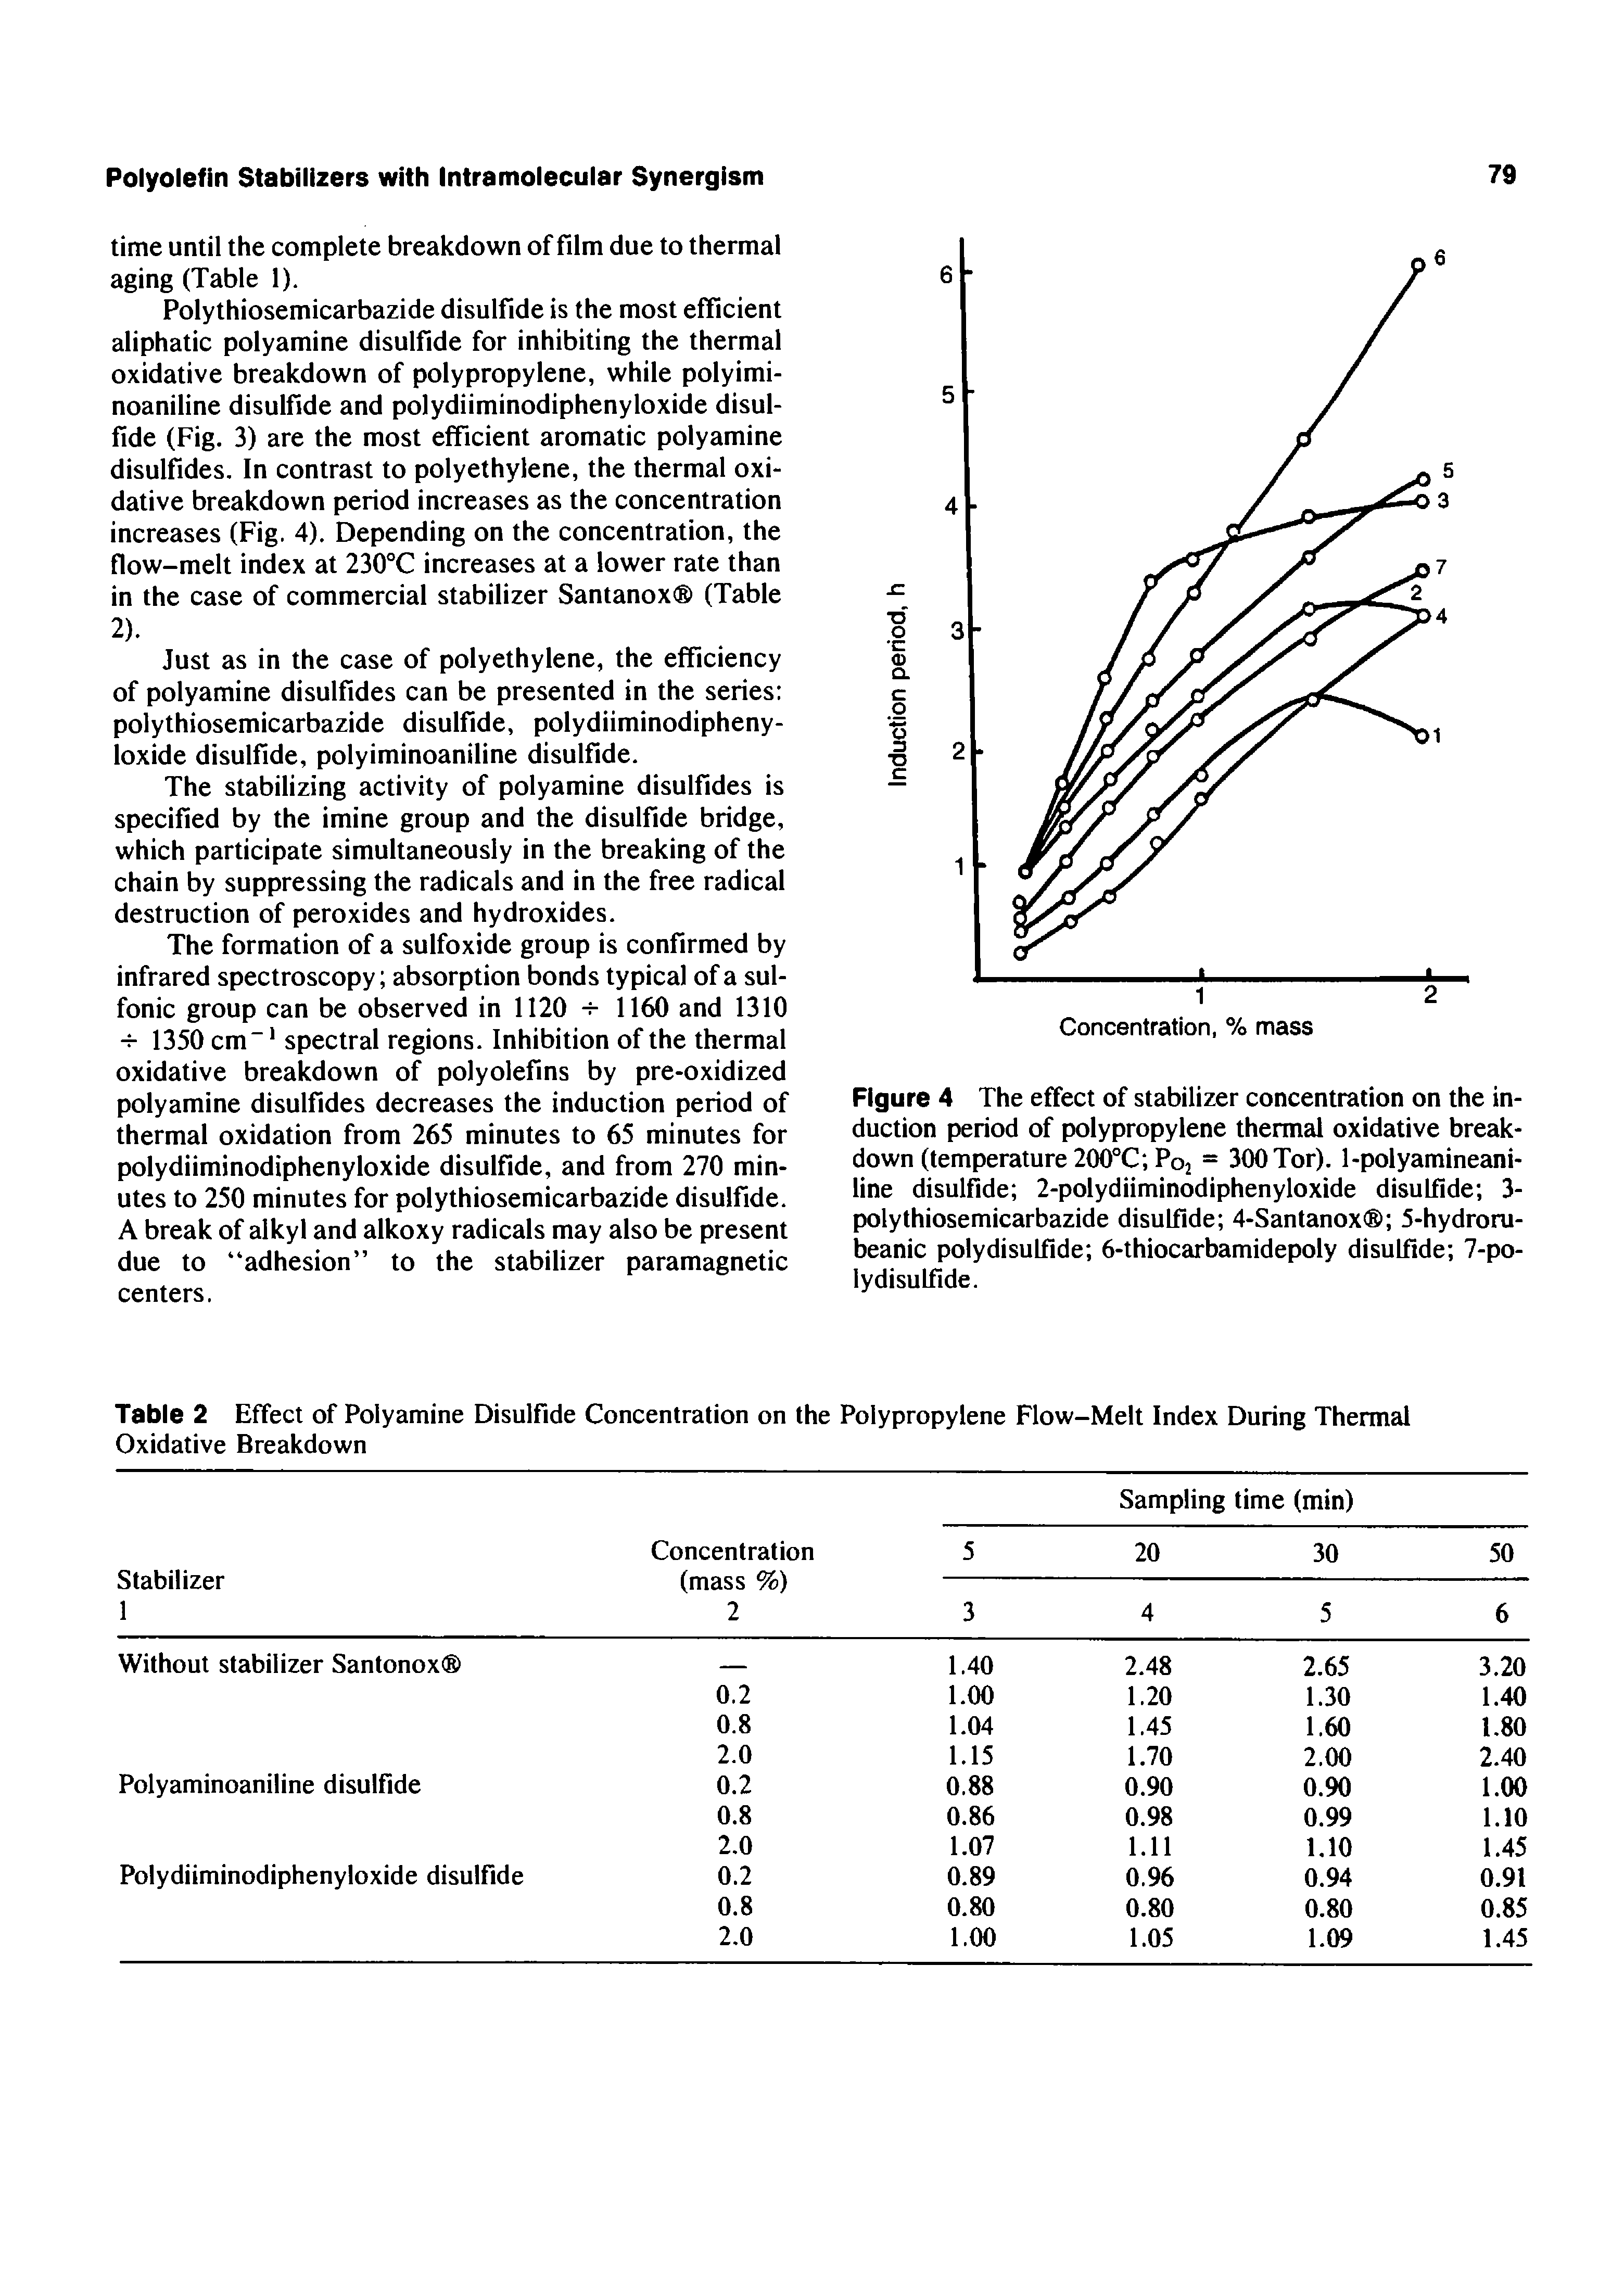 Table 2 Effect of Polyamine Disulfide Concentration on the Polypropylene Flow-Melt Index During Thermal Oxidative Breakdown...